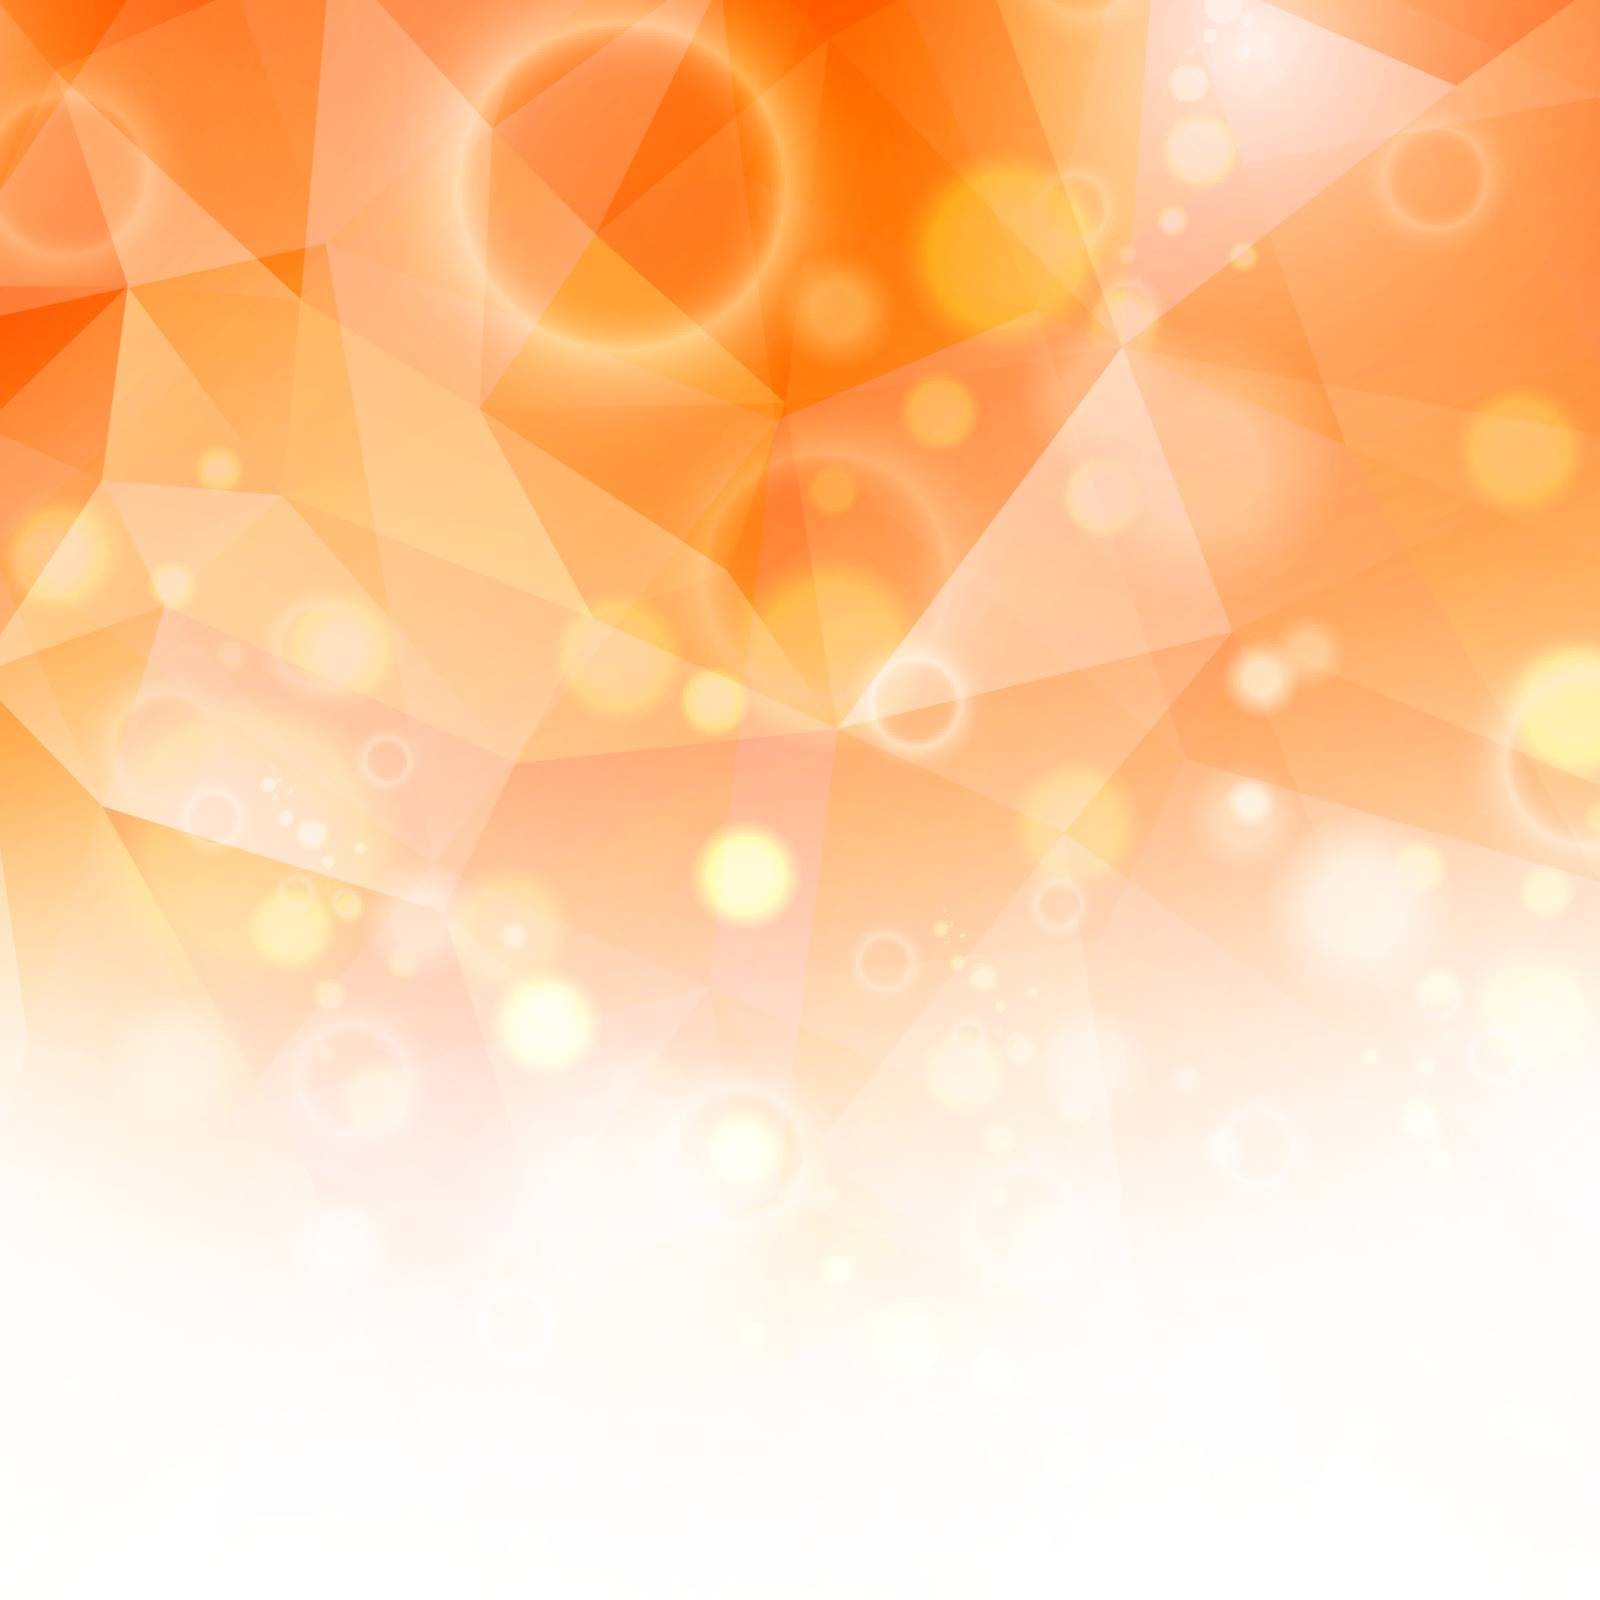 Abstract Sunny Orange Background With Copyspace